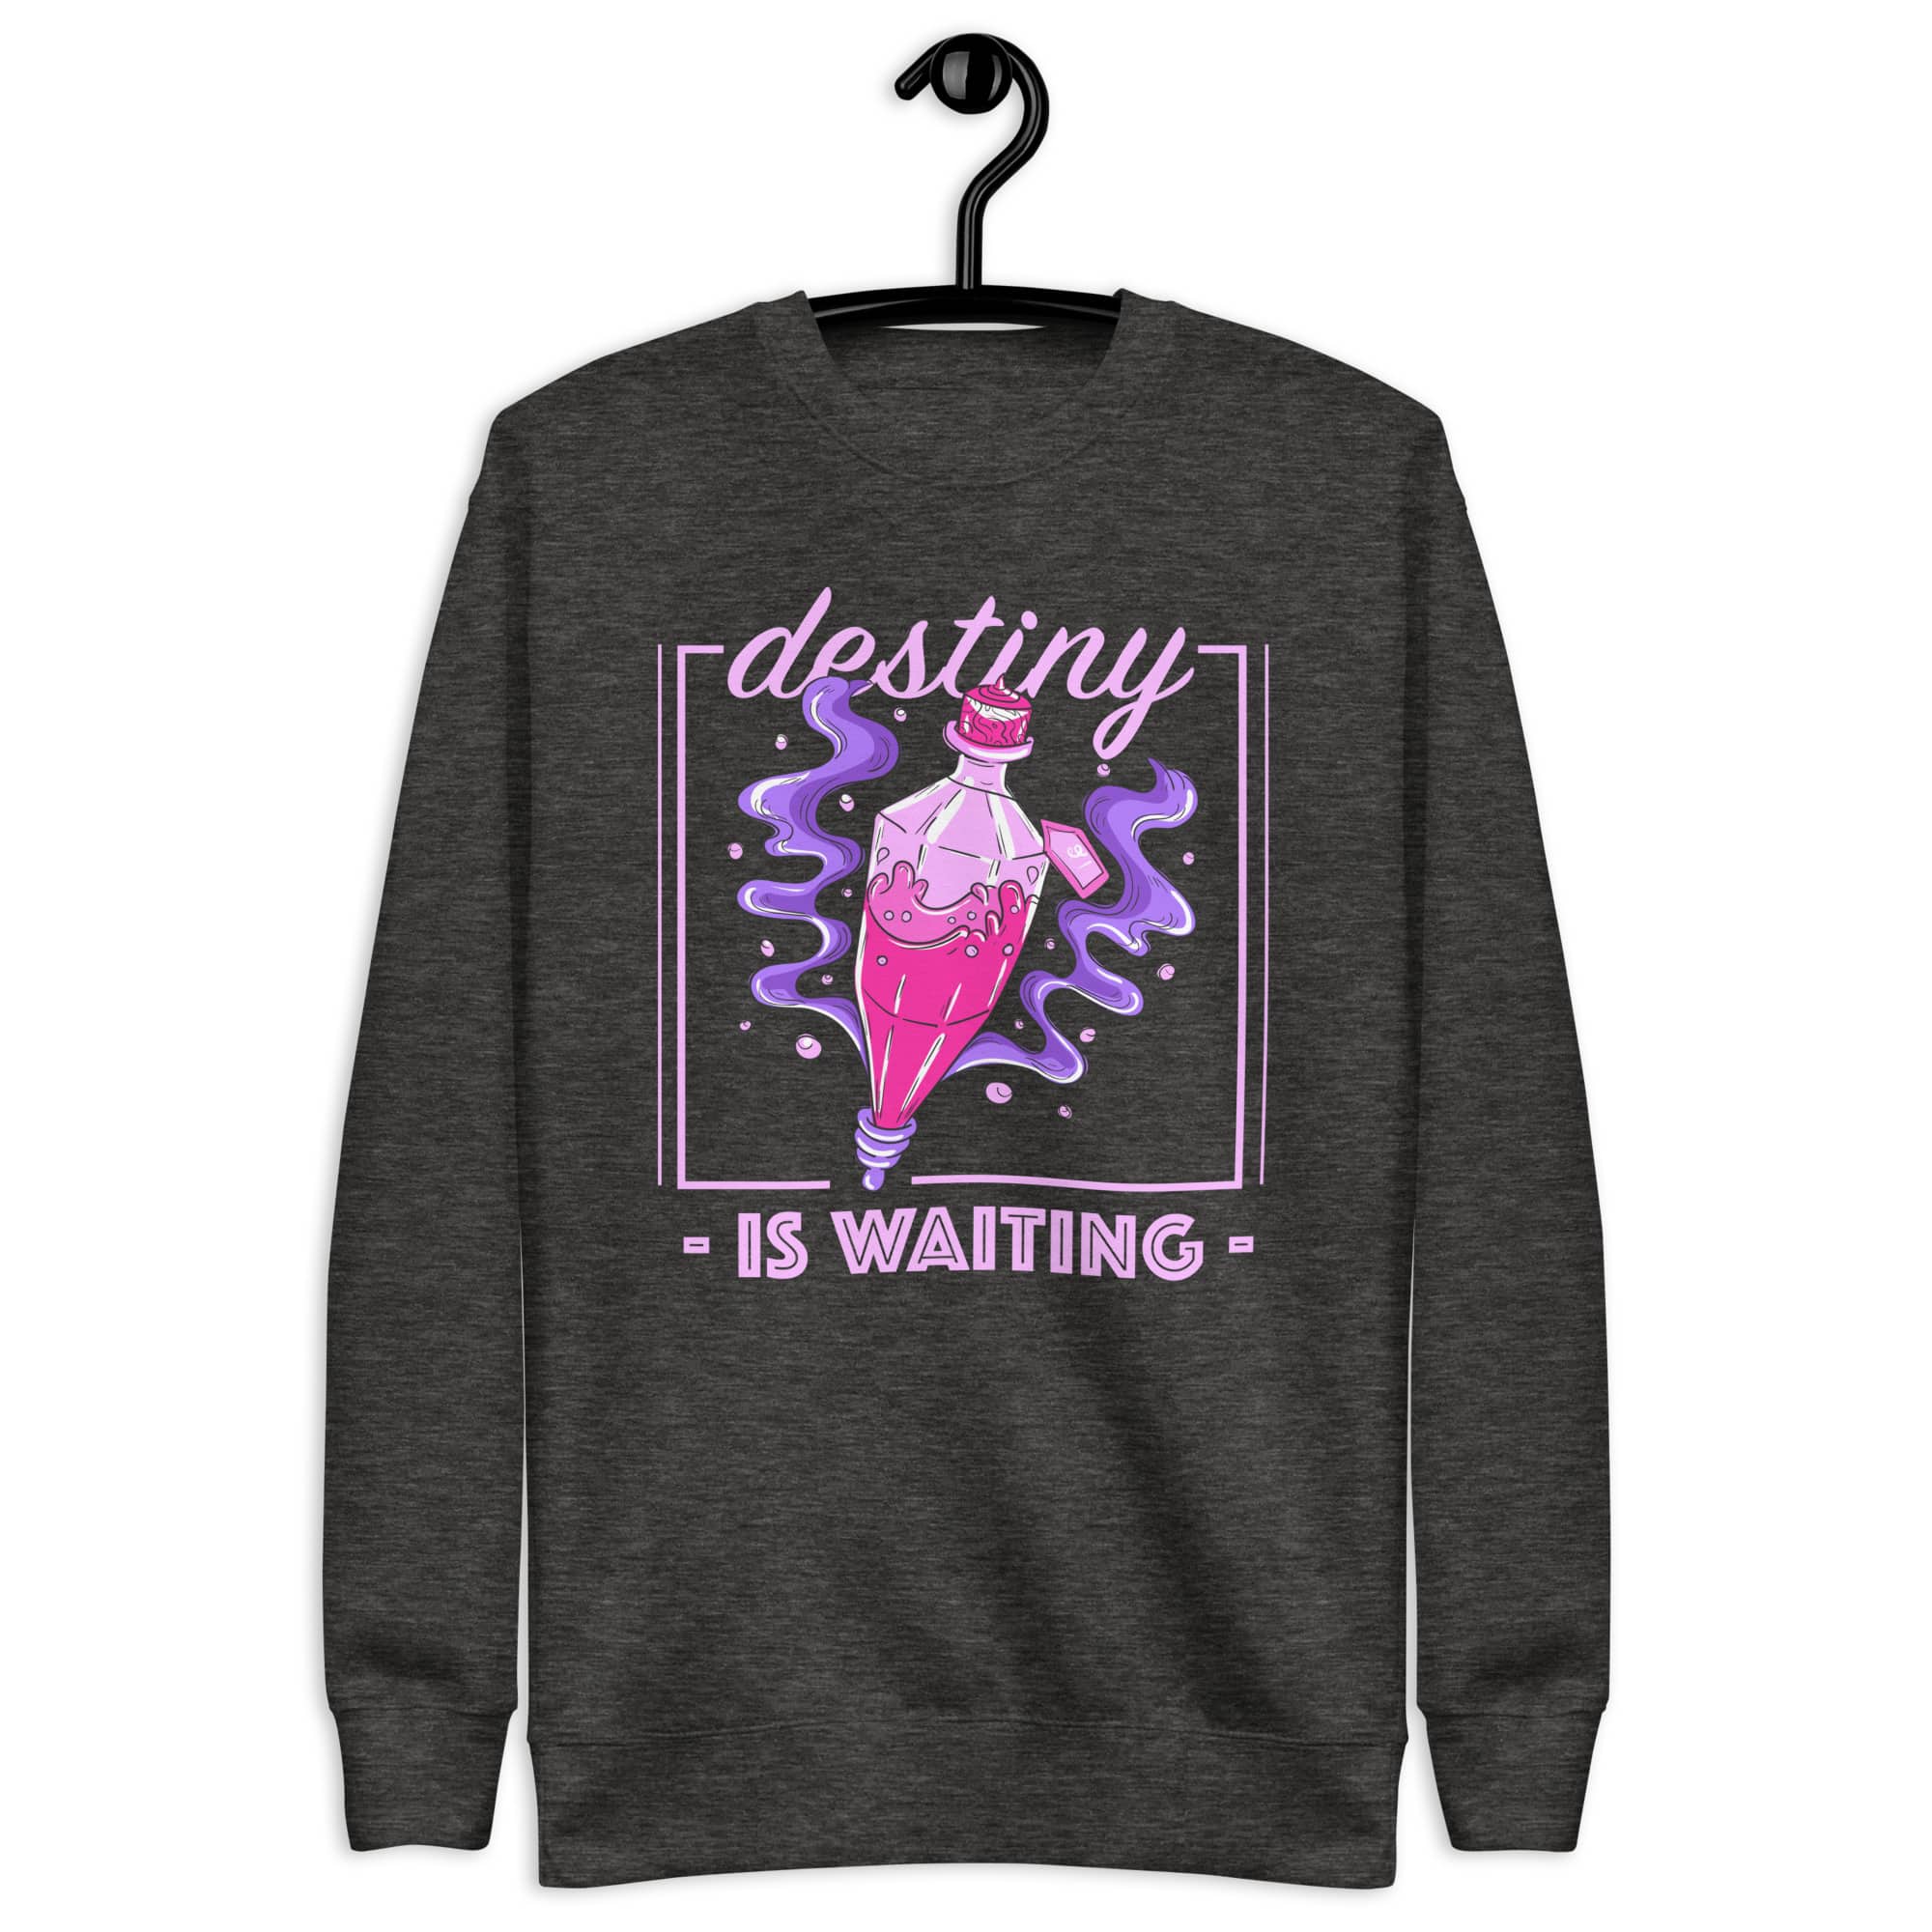 Destiny Is Waiting Premium Sweatshirt unisex-premium-sweatshirt-charcoal Men's graphic t-shirts Men's designer shirts Premium sweatshirts Unisex hoodies Premium hooded sweatshirts Designer sweatshirts High-quality sweatshirts Luxury sweatshirts Unisex fleece sweatshirts Premium pullover sweatshirts Unisex heavyweight sweatshirts Premium cotton sweatshirts Video game store Gaming merchandise Gaming accessories shop Online gaming store Video game shop near me Gaming console store PC gaming store Gaming gear shop Retro gaming shop Board game shop Anime merchandise Anime store online Japanese anime shop Anime figurines Manga shop Anime DVDs Anime accessories Anime apparel Anime collectibles Anime gifts